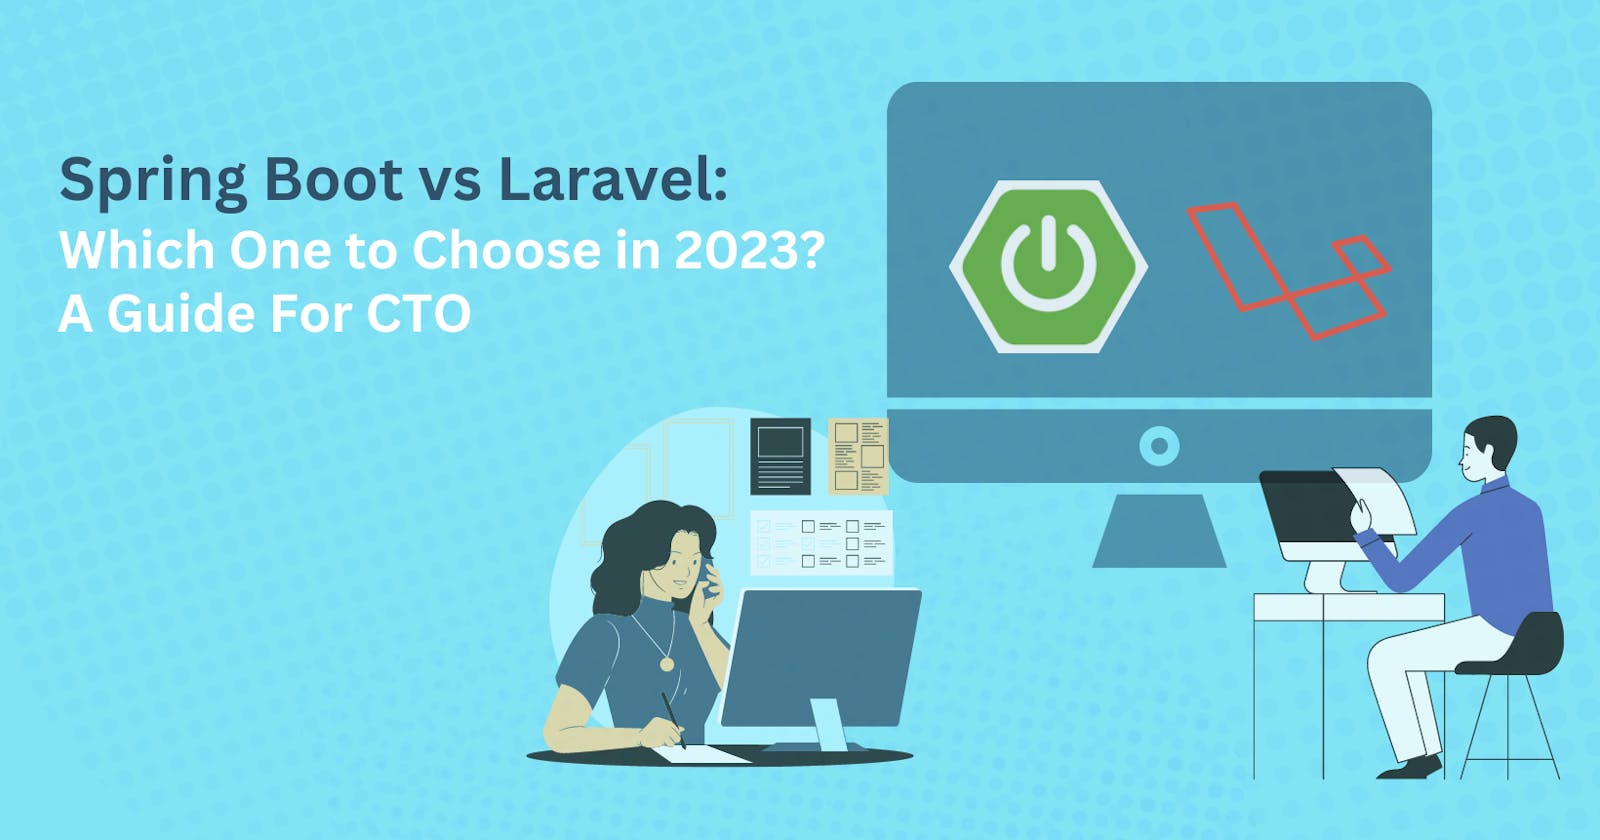 Spring Boot vs Laravel: Which One to Choose in 2023?- A Guide For CTO